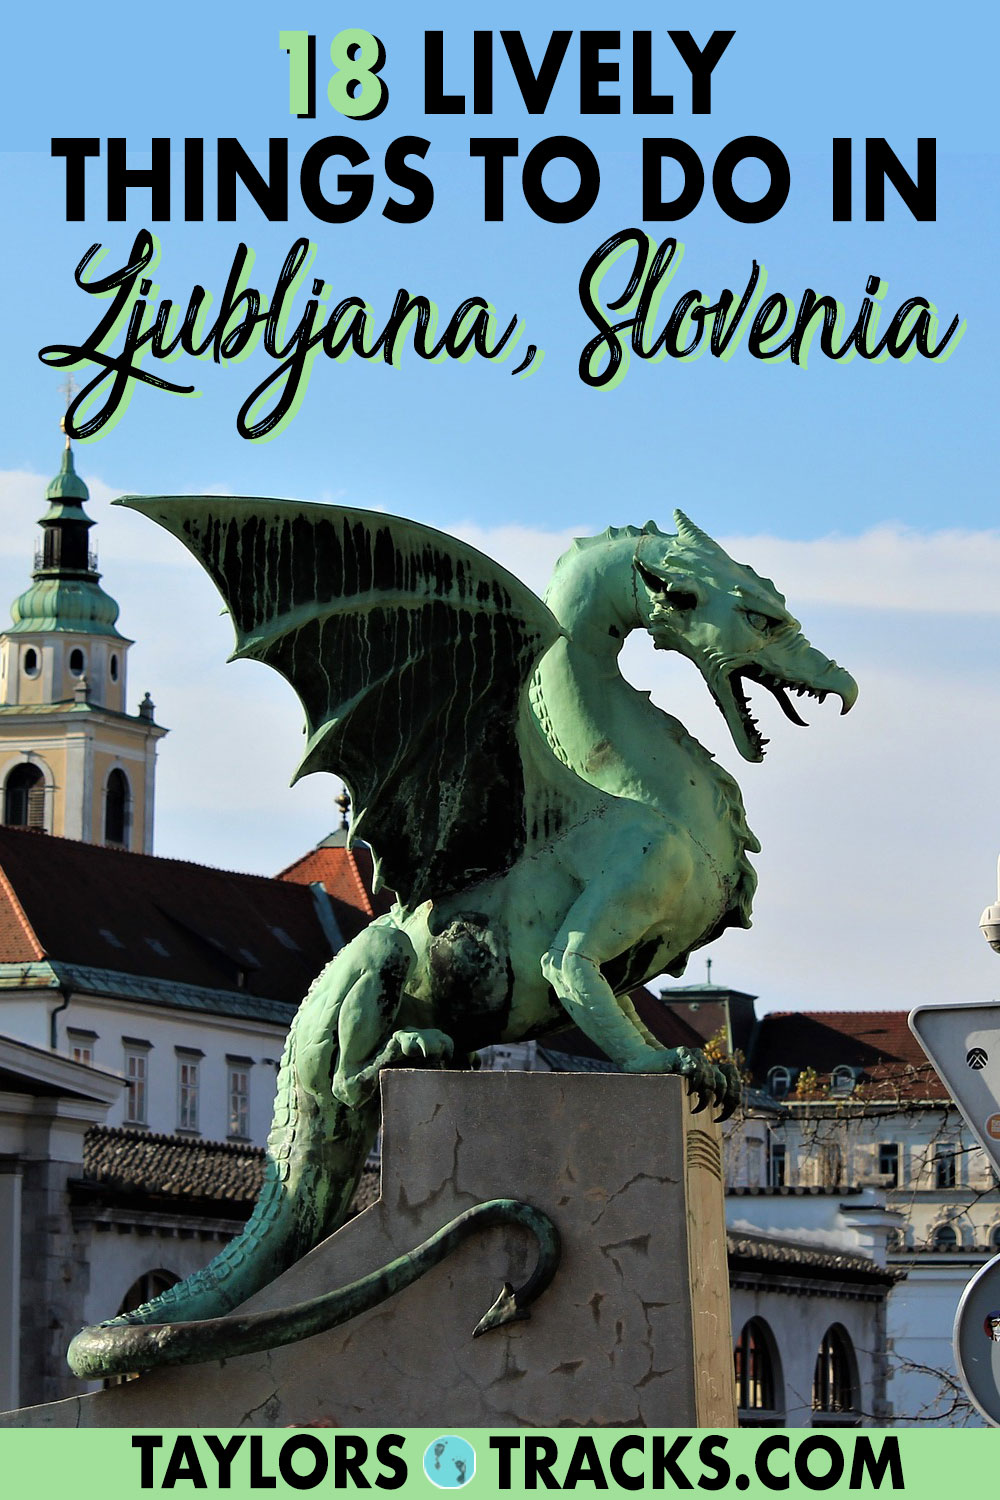 Discover the top things to do in Ljubljana (including free things to do in Ljubljana!) and more in this detailed guide of Slovenia's capital city and beyond.